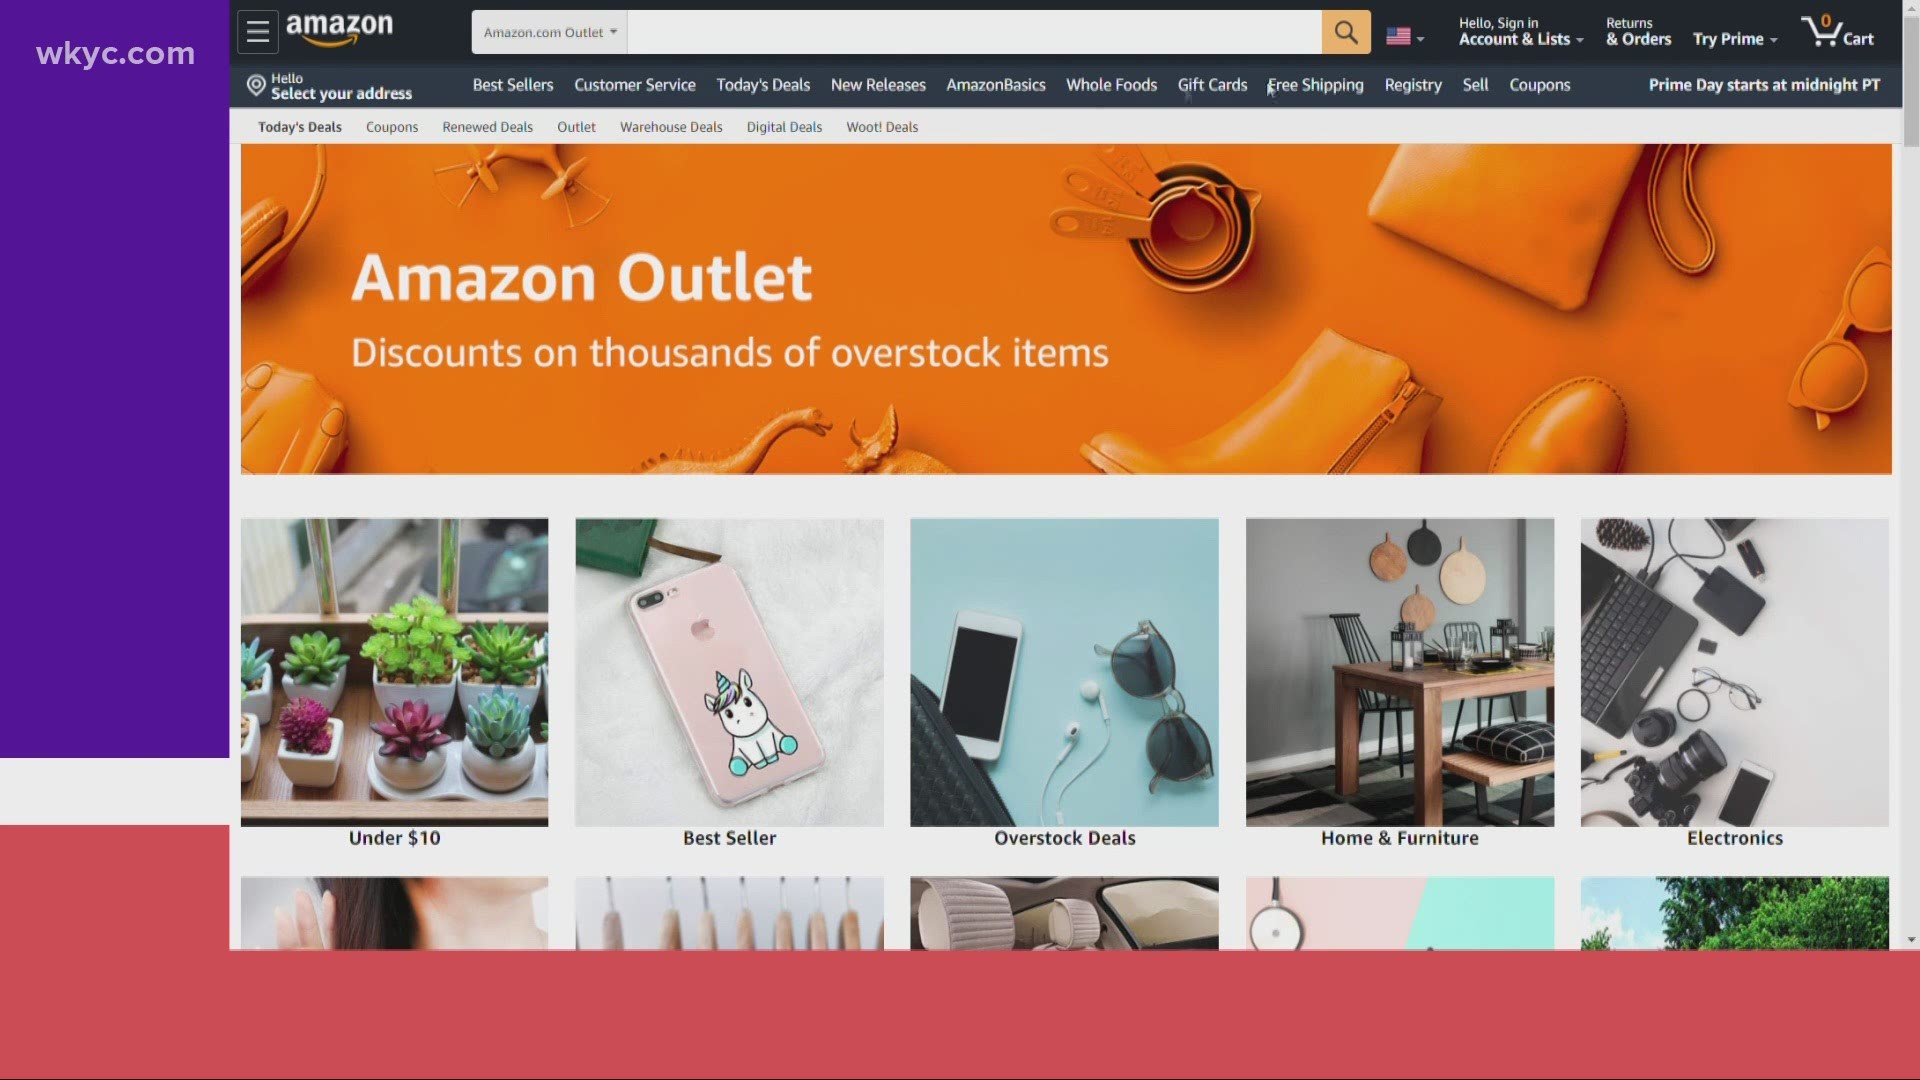 Overstock.com Annual Clearance Event TV Spot, 'Free Shipping on